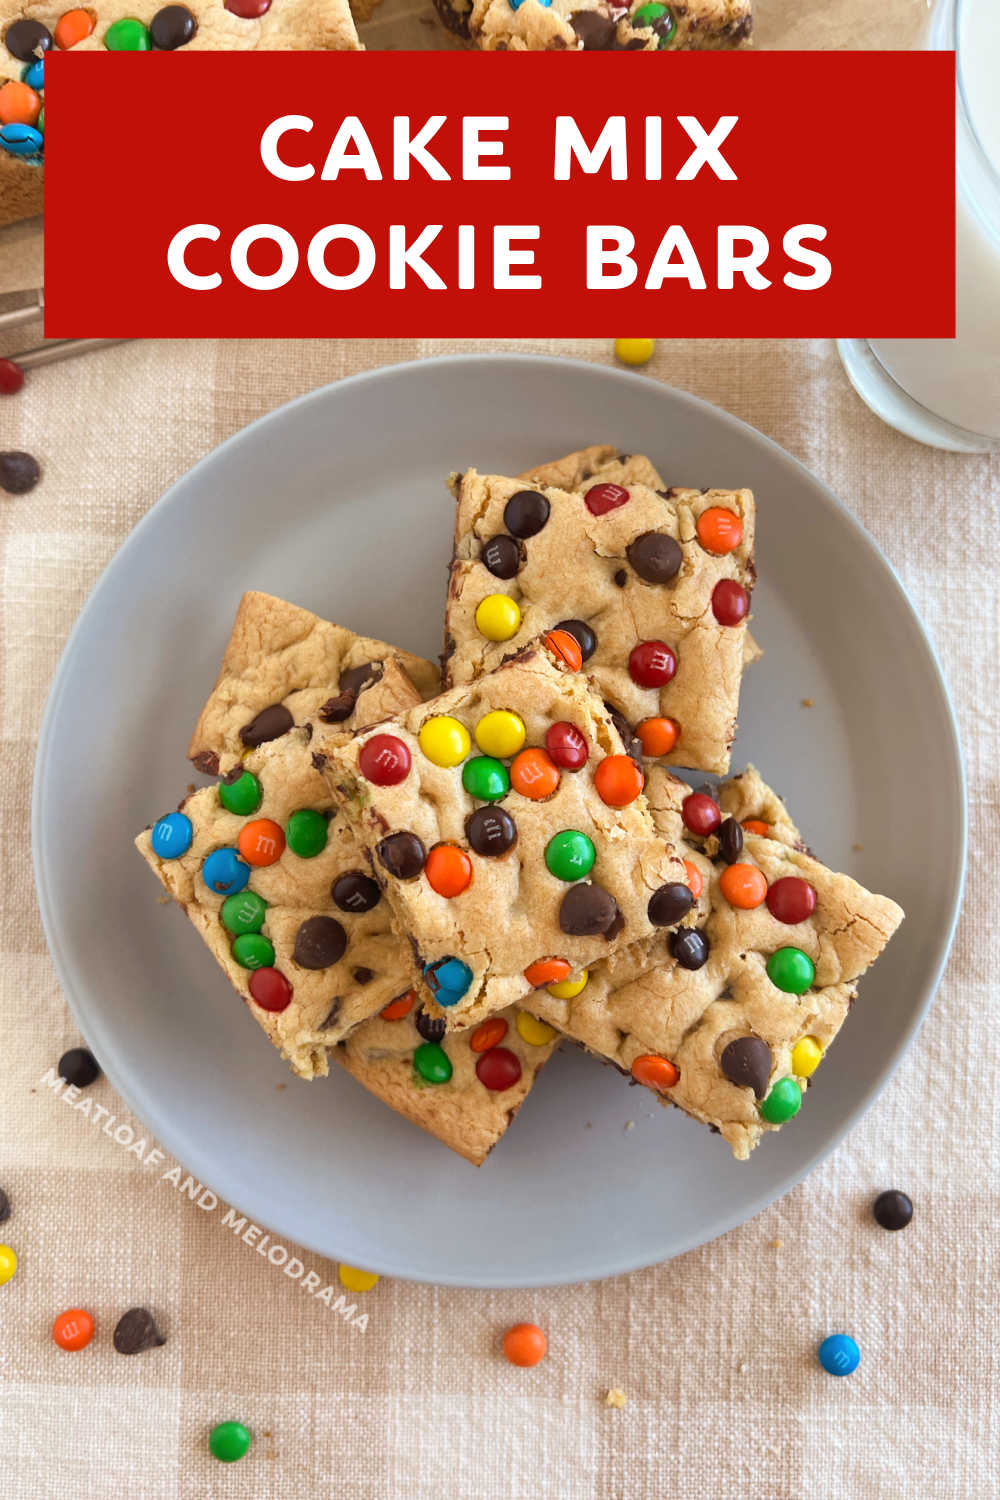 Easy Cake Mix Cookie Bars recipe made with yellow cake mix and chocolate chips are a quick way to satisfy your craving for chocolate chip cookies. Everyone loves this easy dessert recipe! via @meamel